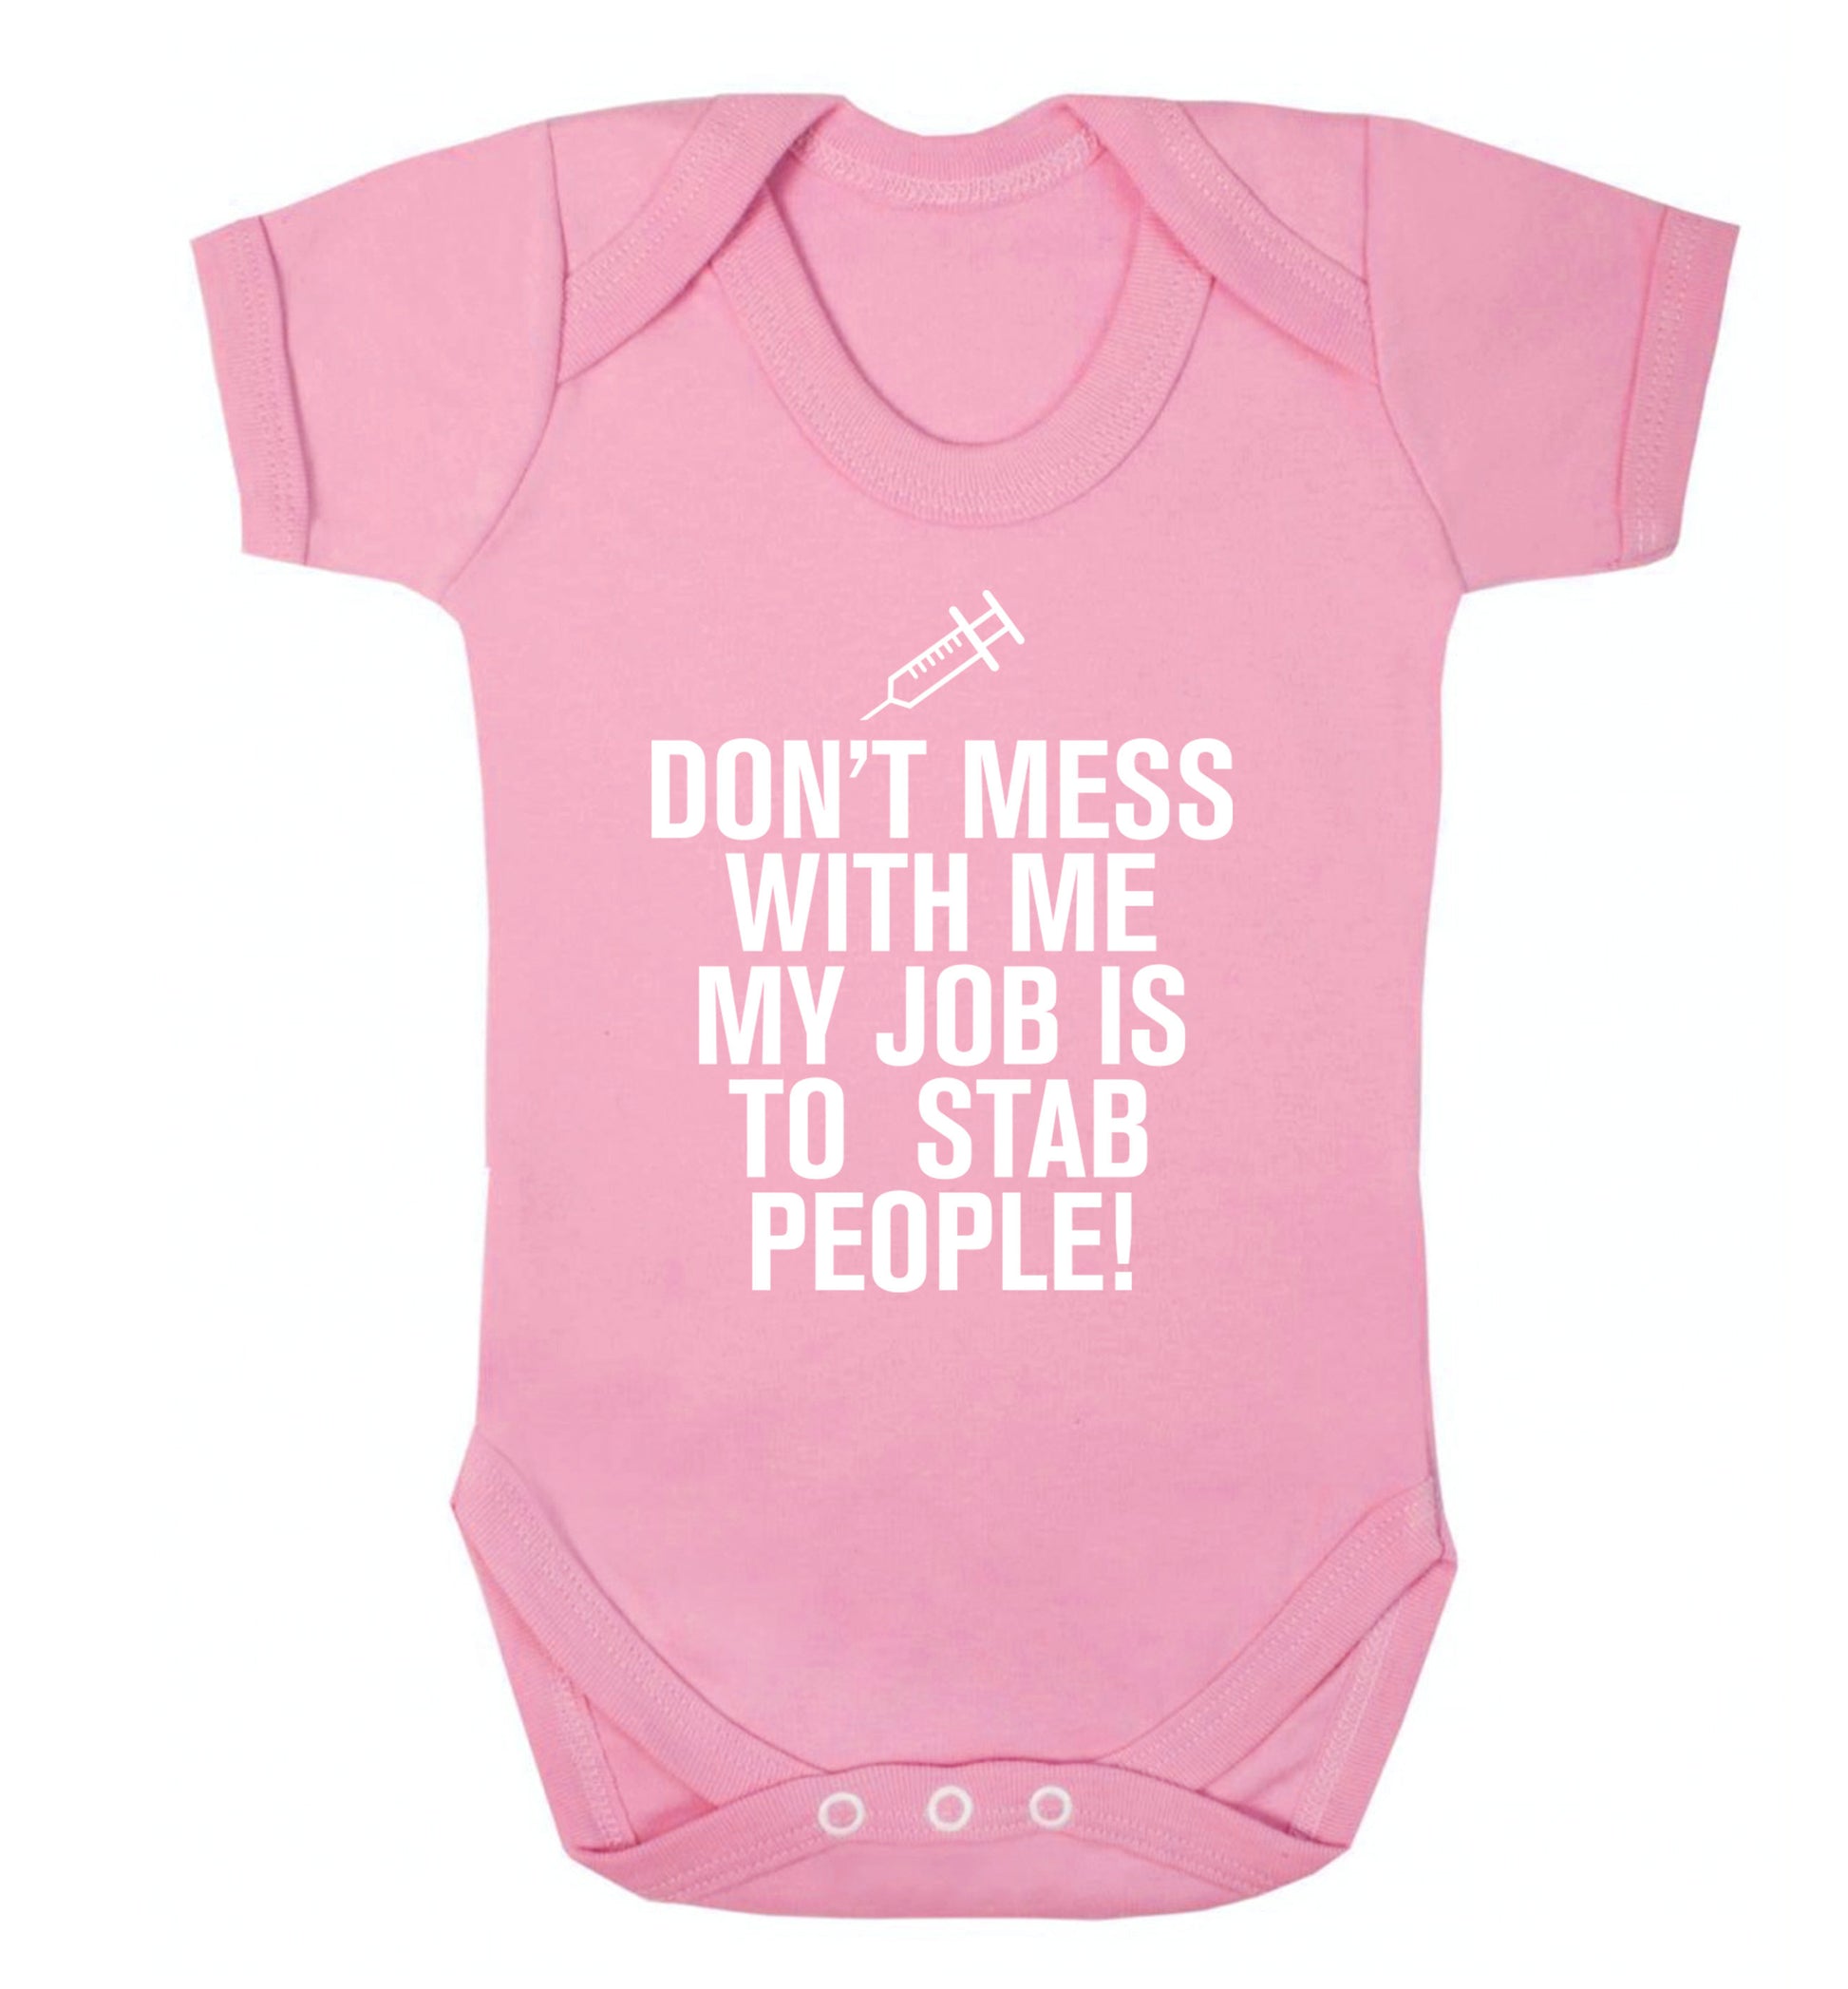 Don't mess with me my job is to stab people! Baby Vest pale pink 18-24 months